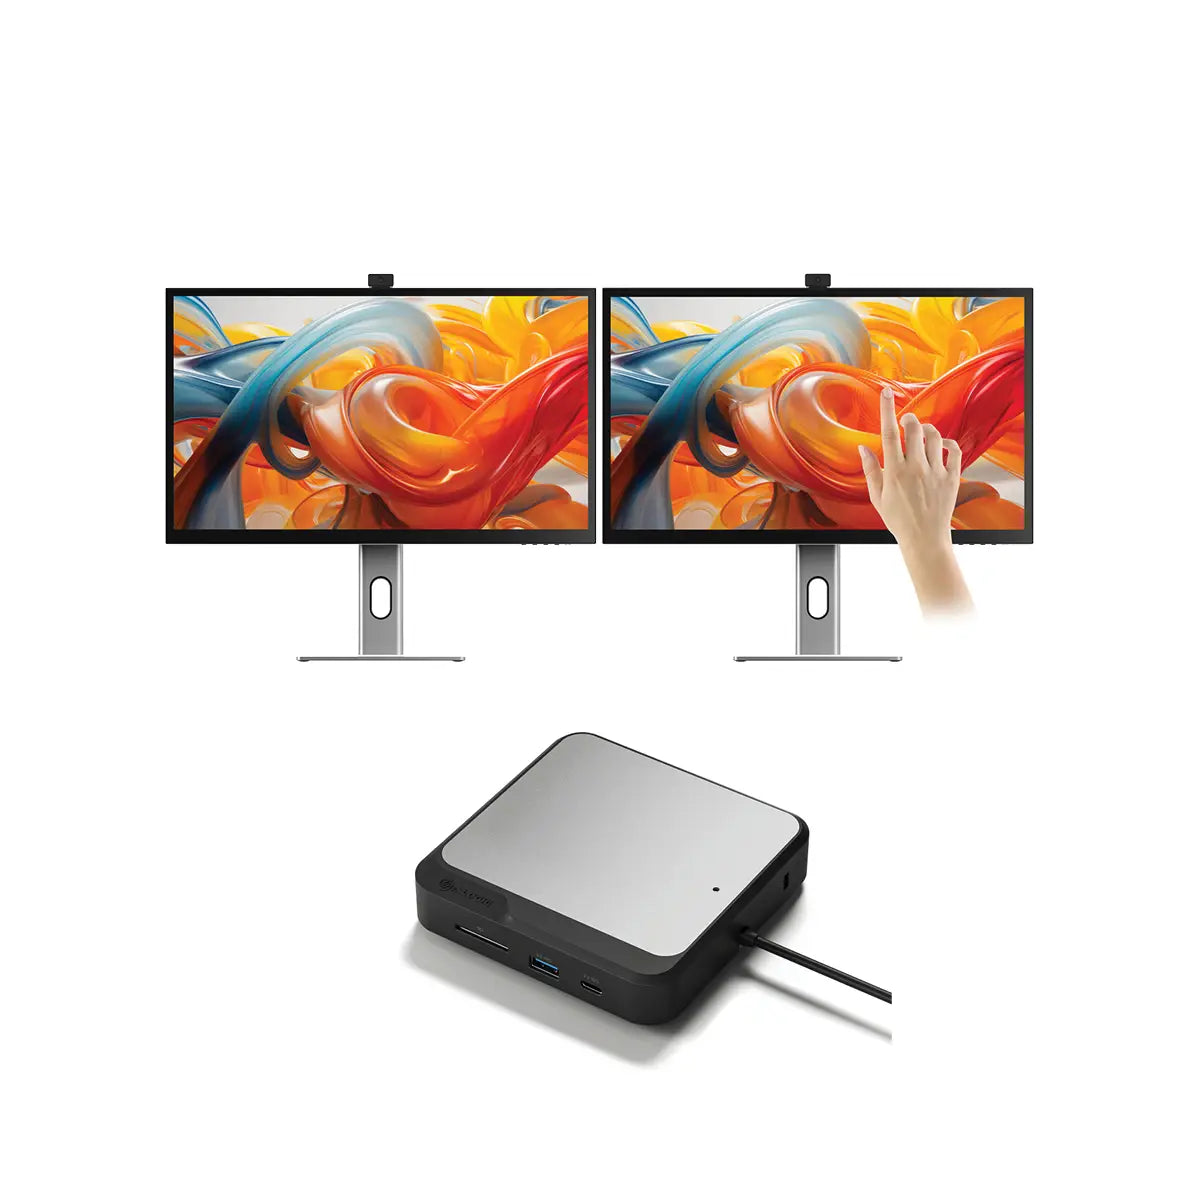 clarity-pro-touch-27-uhd-4k-monitor-with-65w-pd-webcam-and-touchscreen-pack-of-2-dual-4k-universal-docking-station-displayport-edition_1